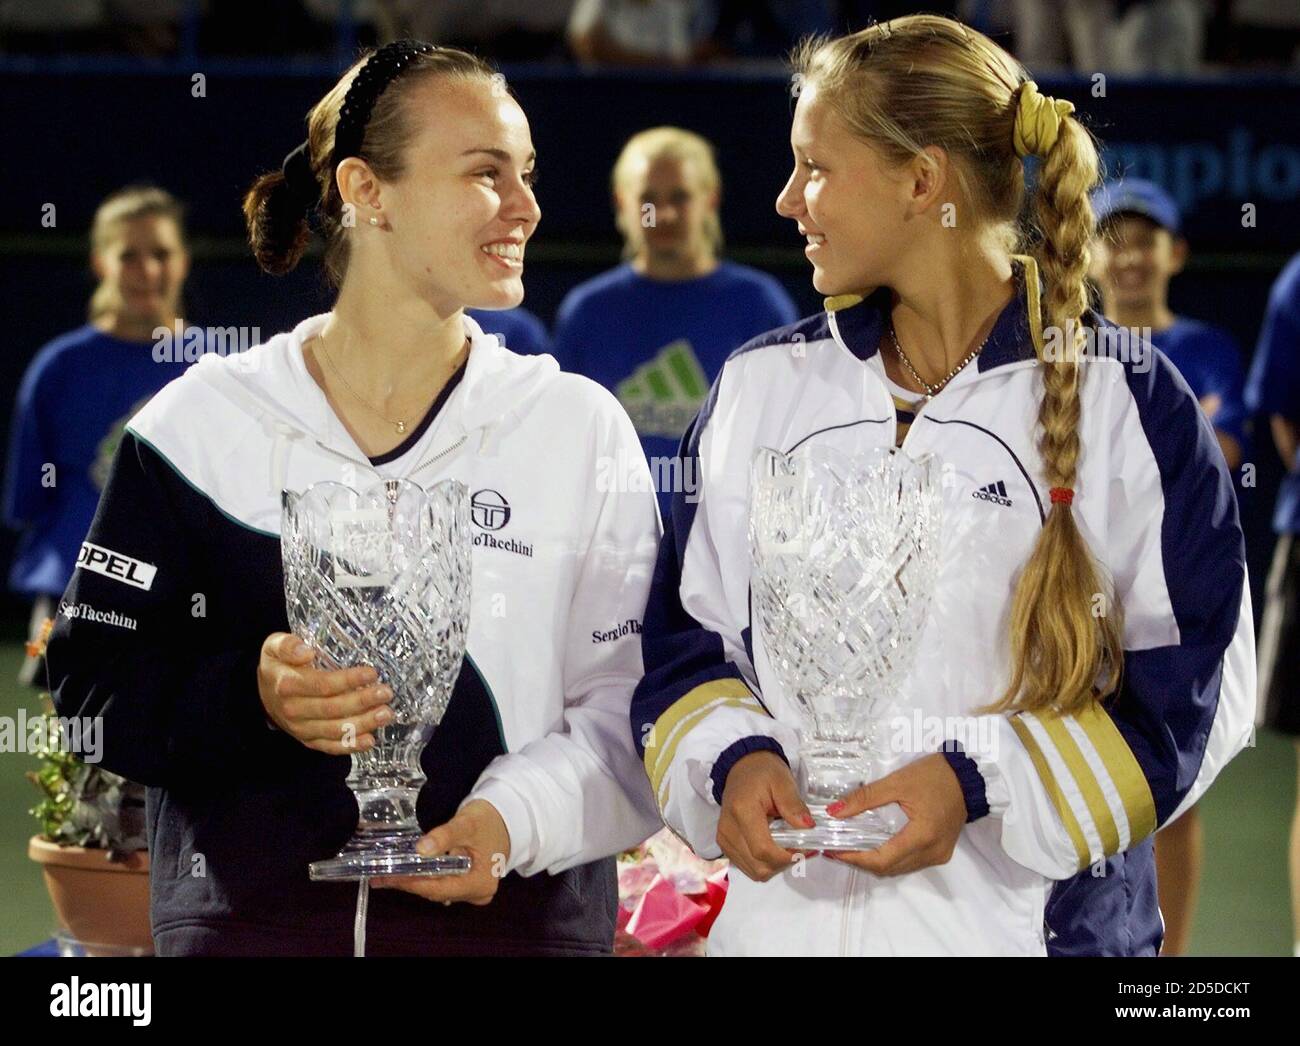 Martina Hingis (L) of Switzerland and her doubles partner Ana Kournikova of  Russia chat while holding their trophies after their victory against Mary  Jo Fernandez of the USA and Jana Novotna of